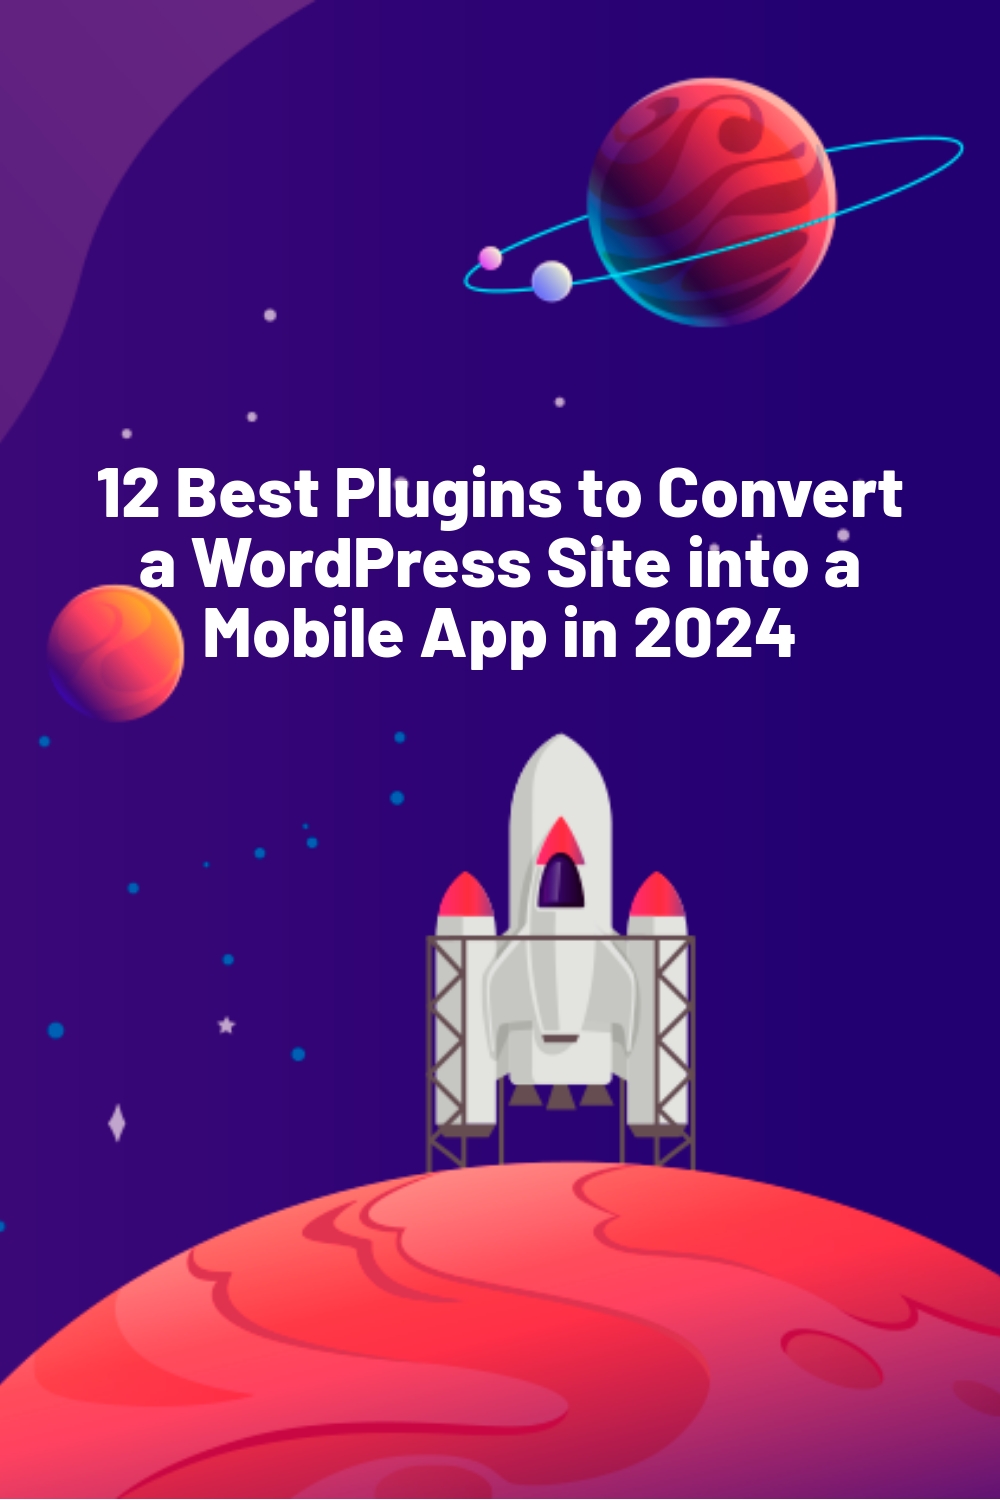 12 Best Plugins to Convert a WordPress Site into a Mobile App in 2024